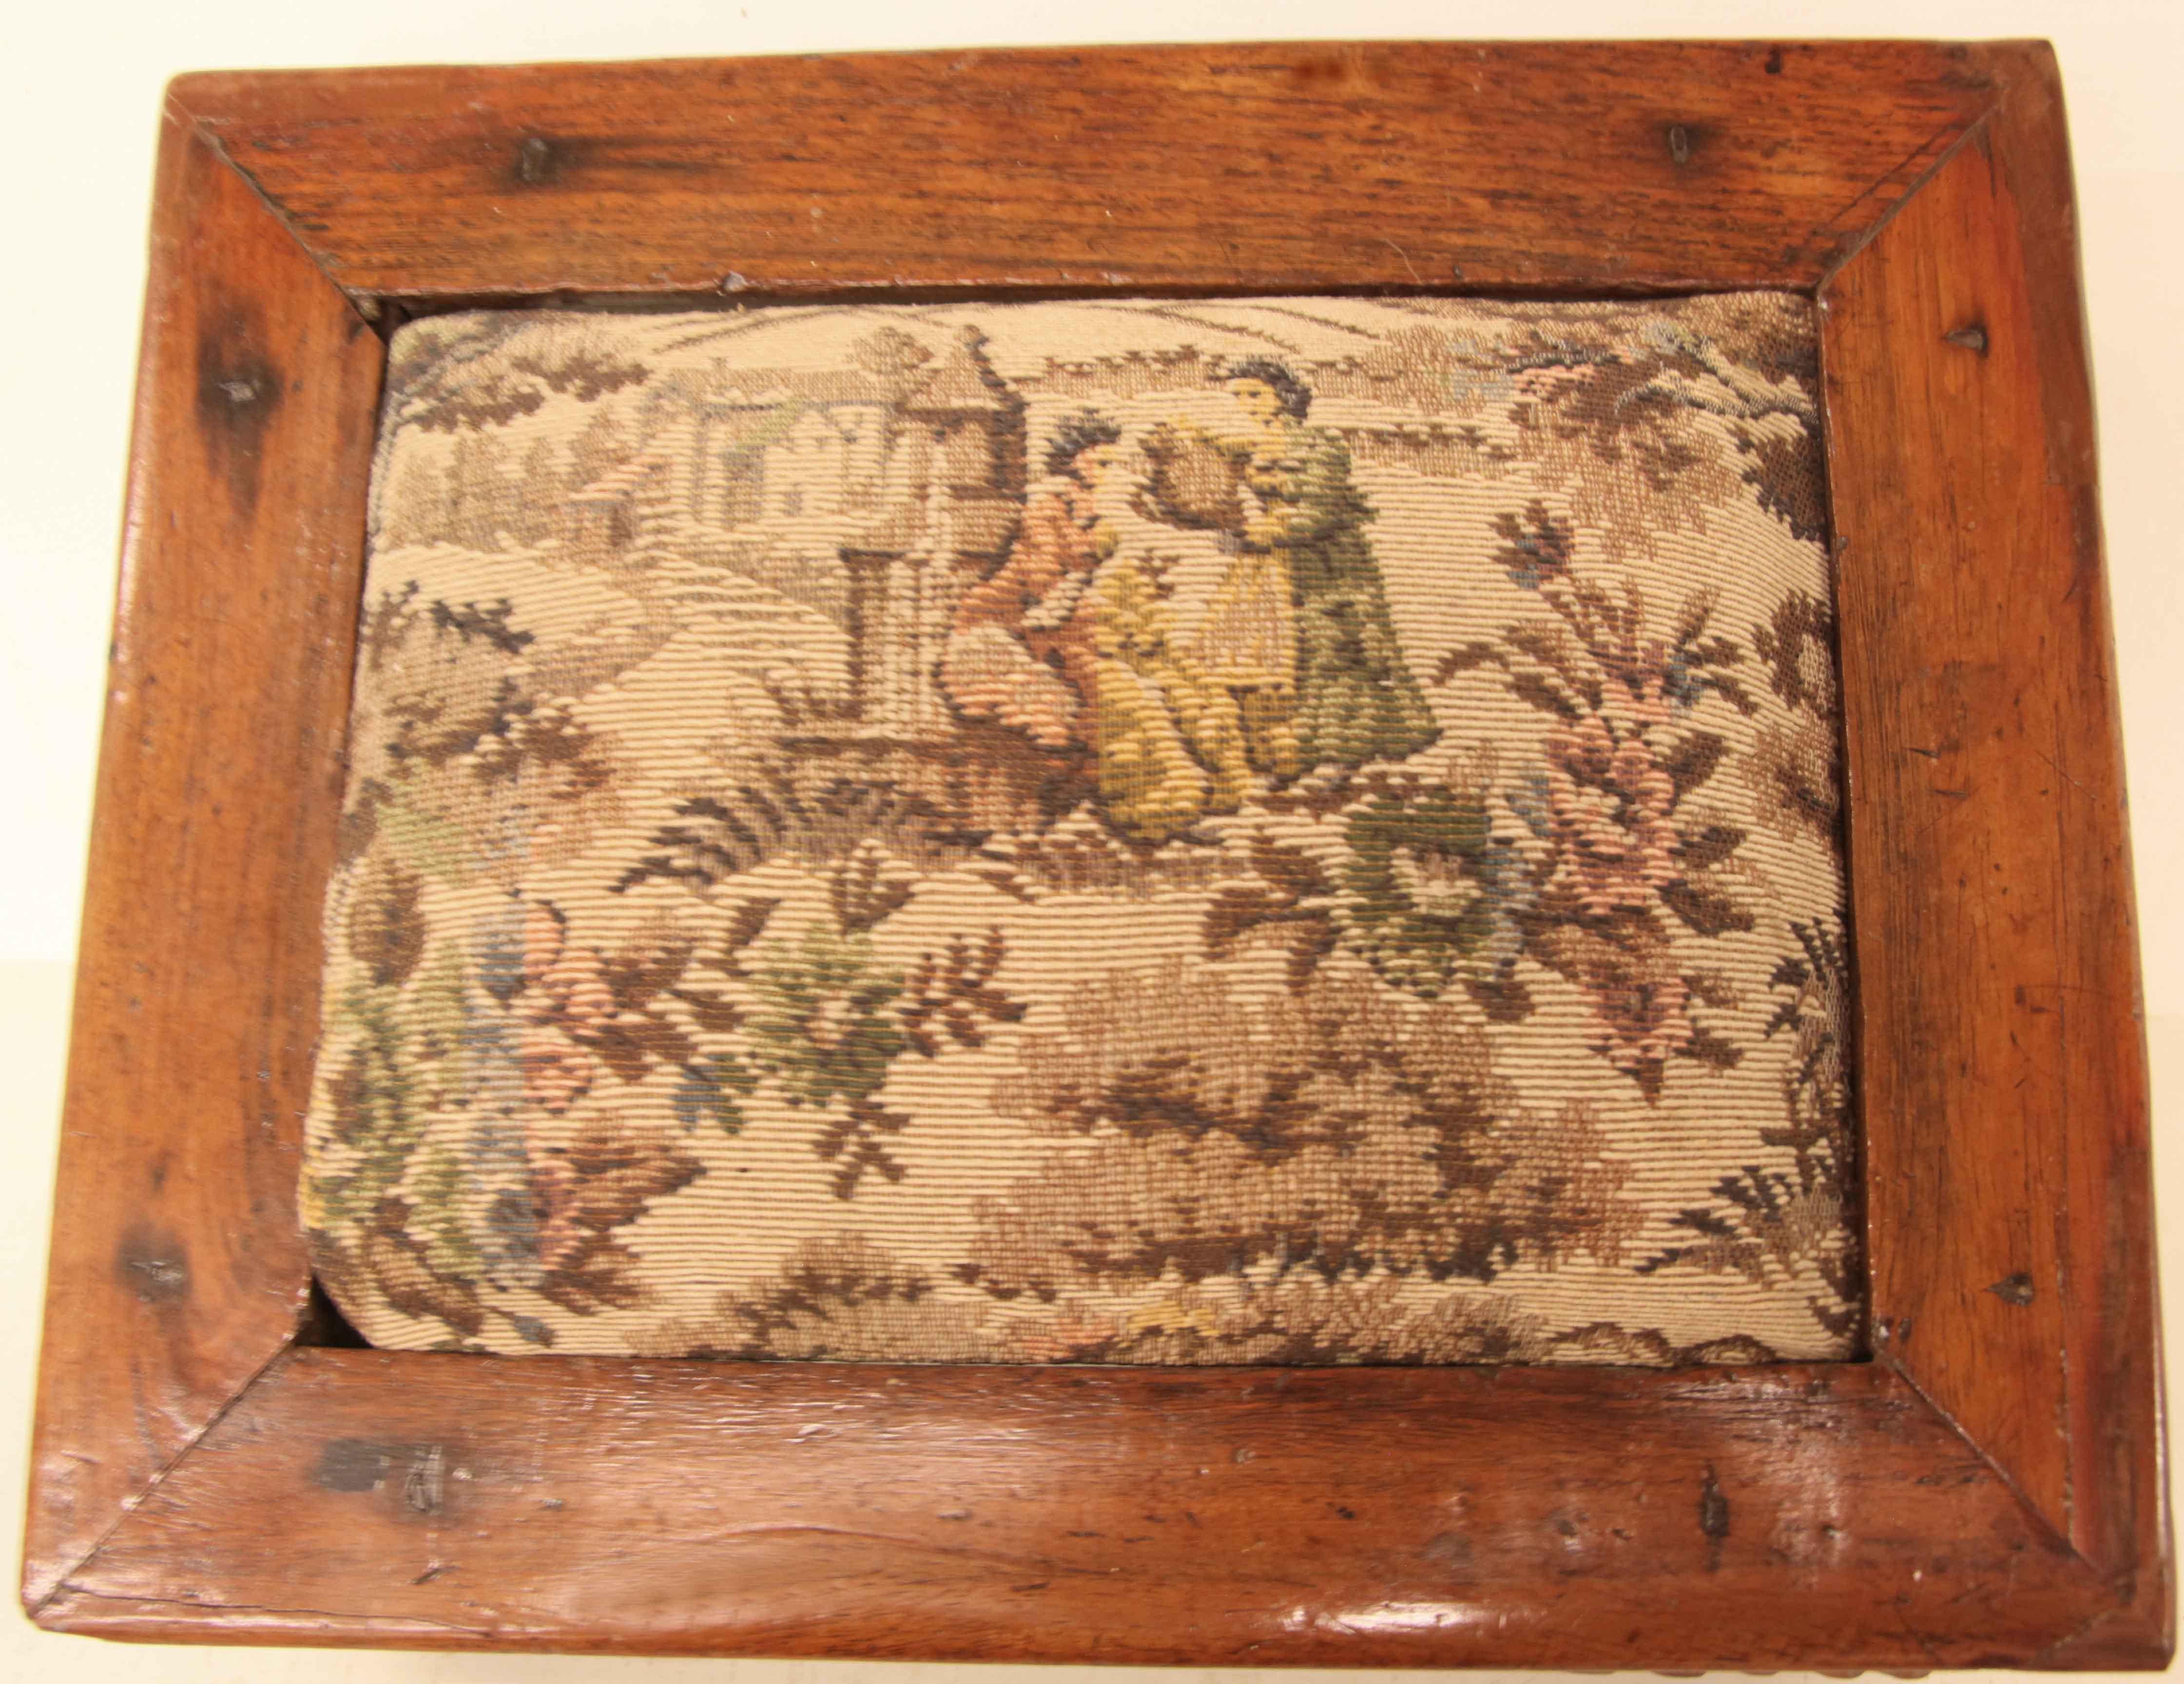 Carved teak foot stool,  the raised fabric cushion features two women at a well with flowers and foliage around them., this is followed by a 2'' wide flat surface.  The apron  has carved scrolling foliage with a central rosette on two sides.  Below